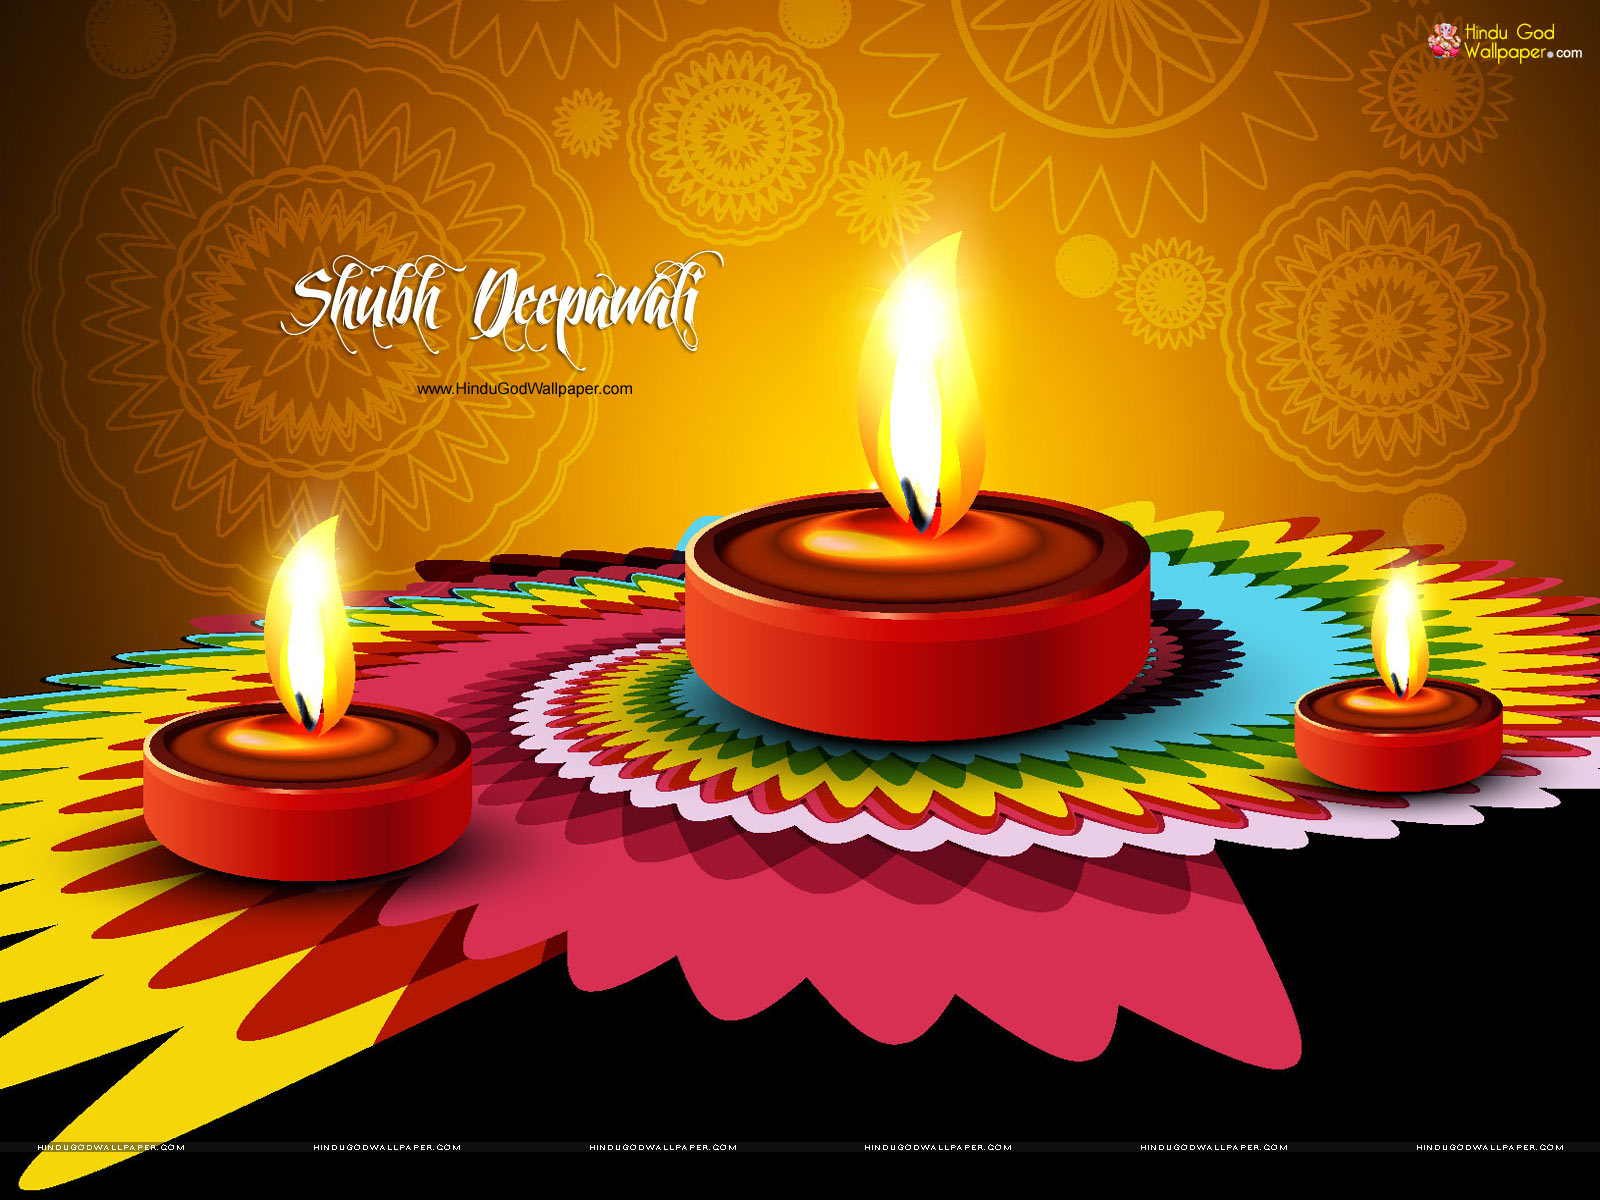 Happy Diwali Images 2015 Free Download - Colaboratory